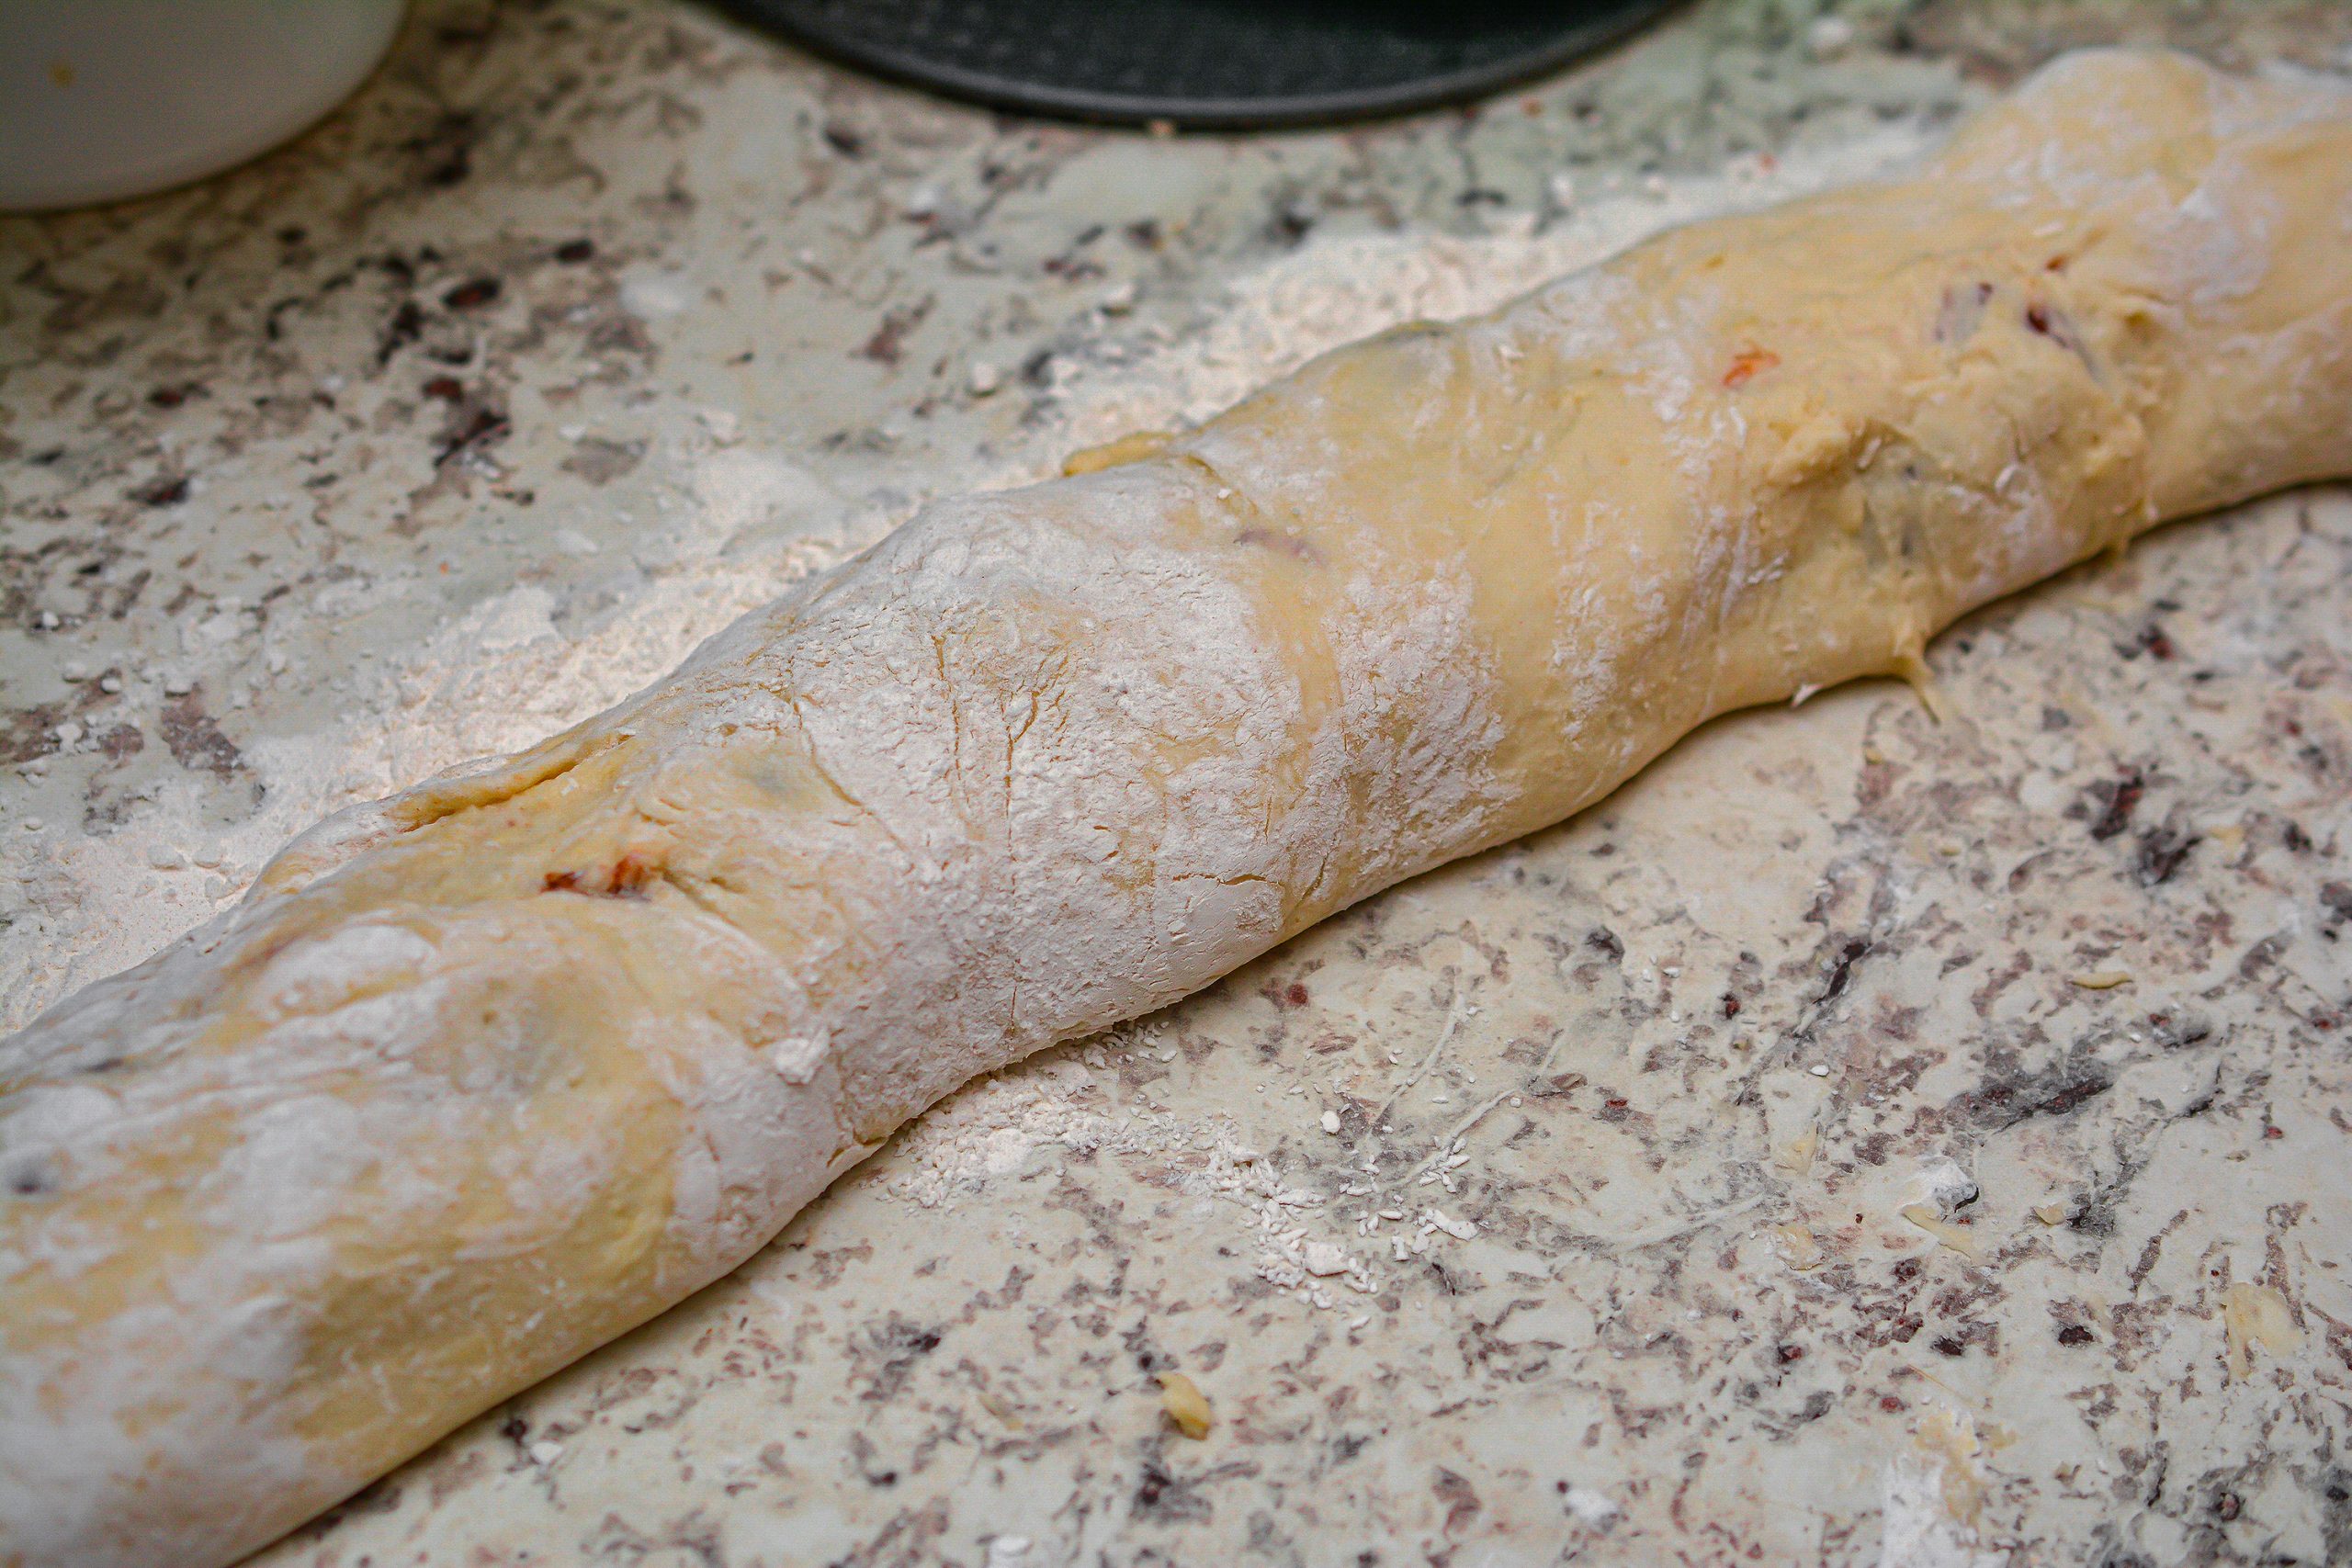 Carefully roll the dough up, and then slice into 12 even sections.